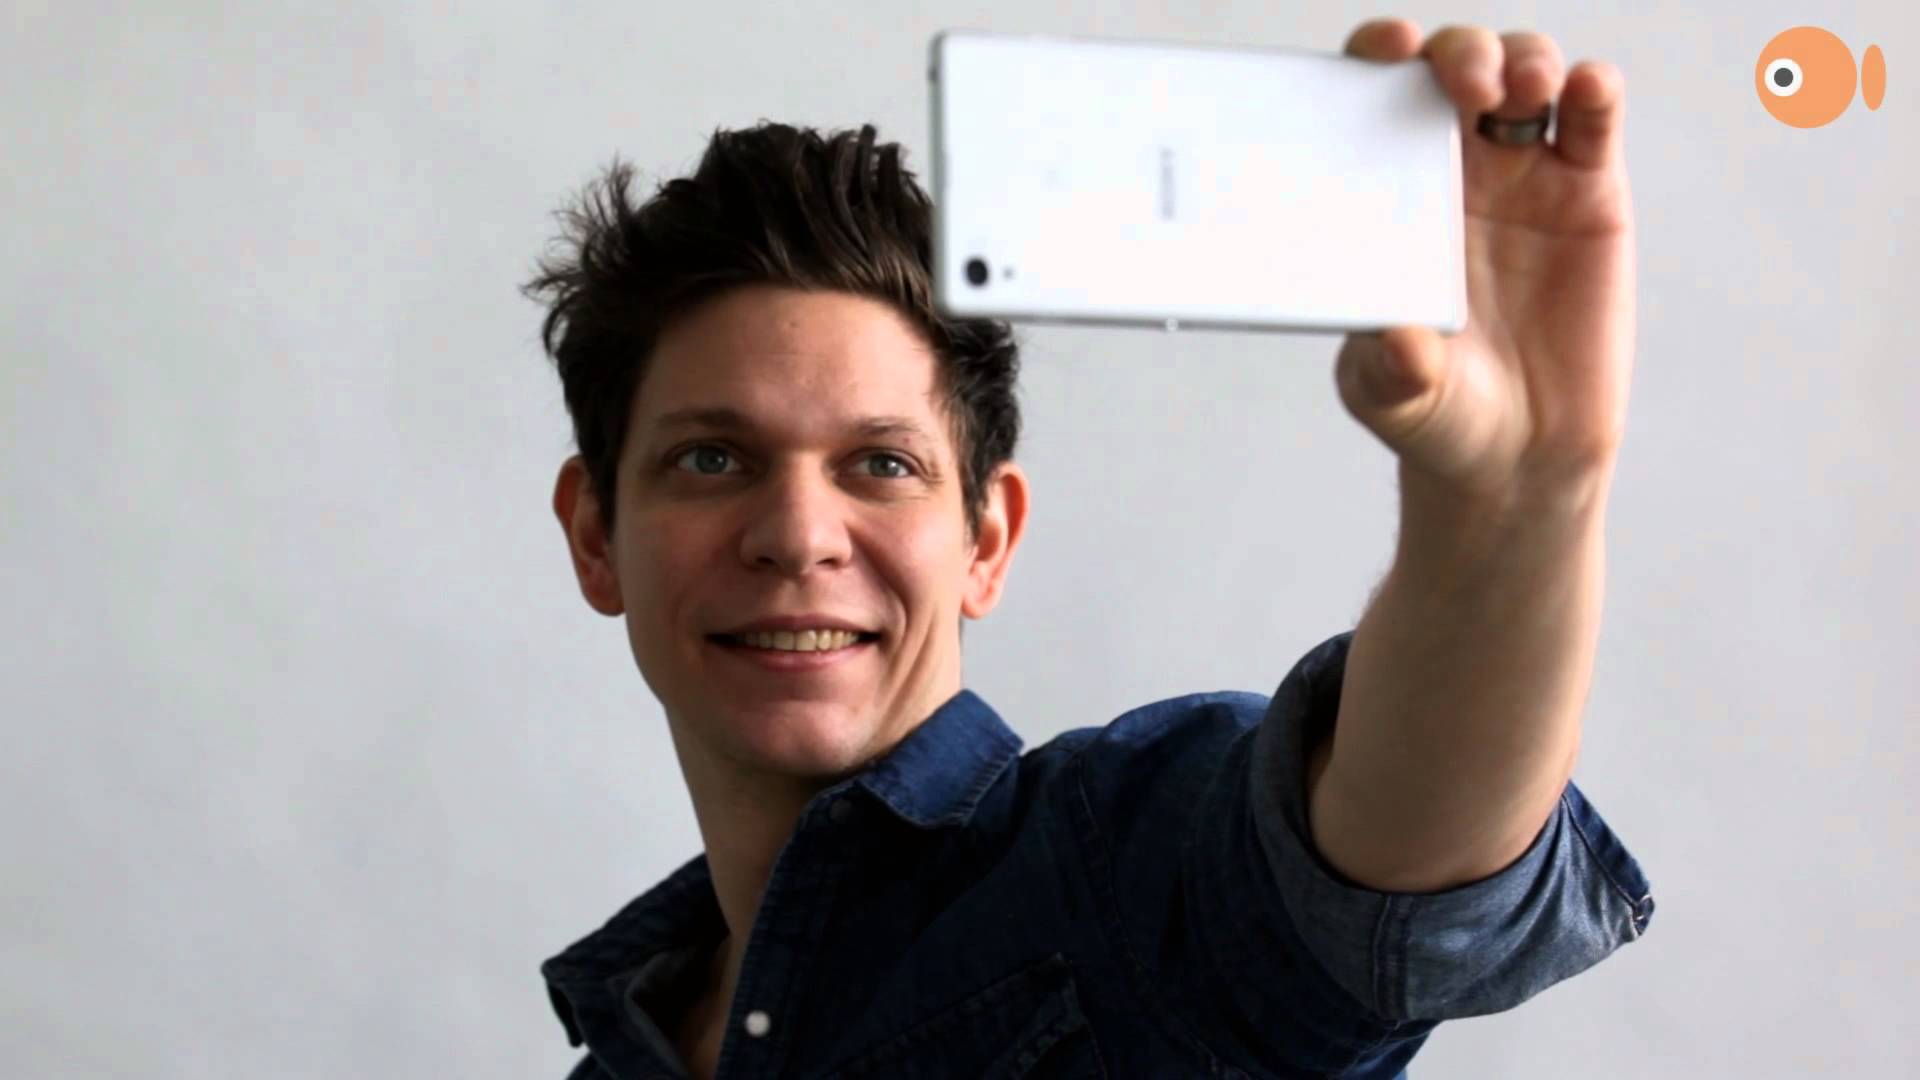 Geek insider, geekinsider, geekinsider. Com,, sponsored post: crunchfish and gocam: the next step in selfies, applications